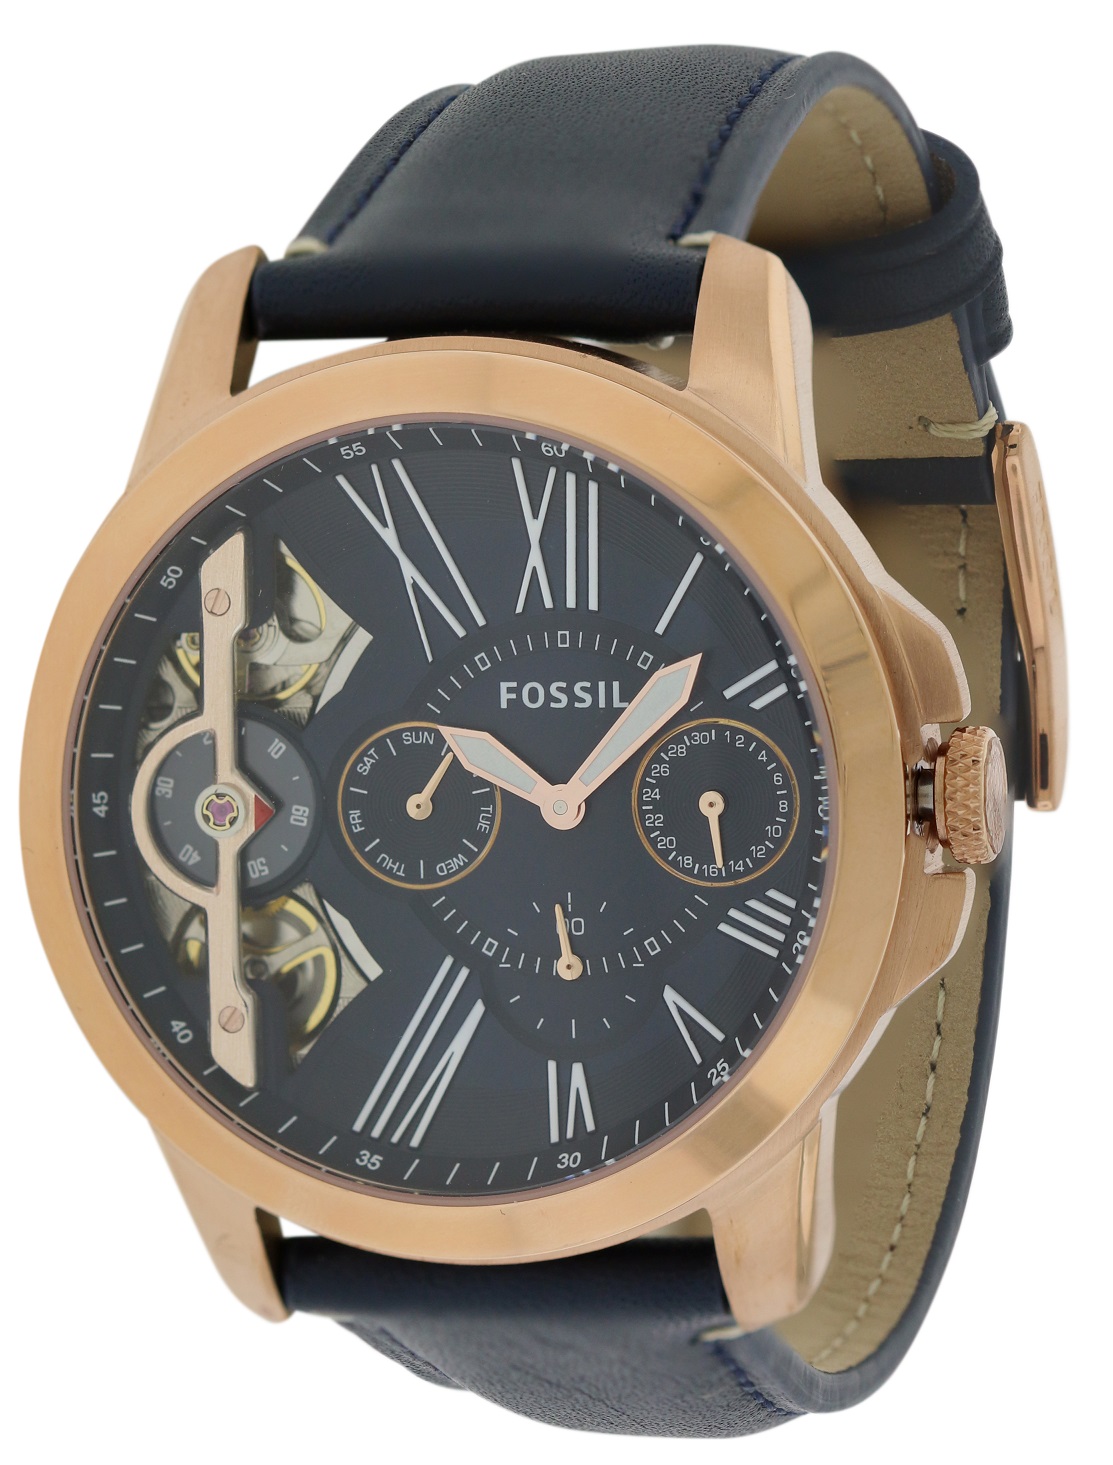 Fossil Grant Automatic Leather Mens Watch ME1162 796483283640 | eBay